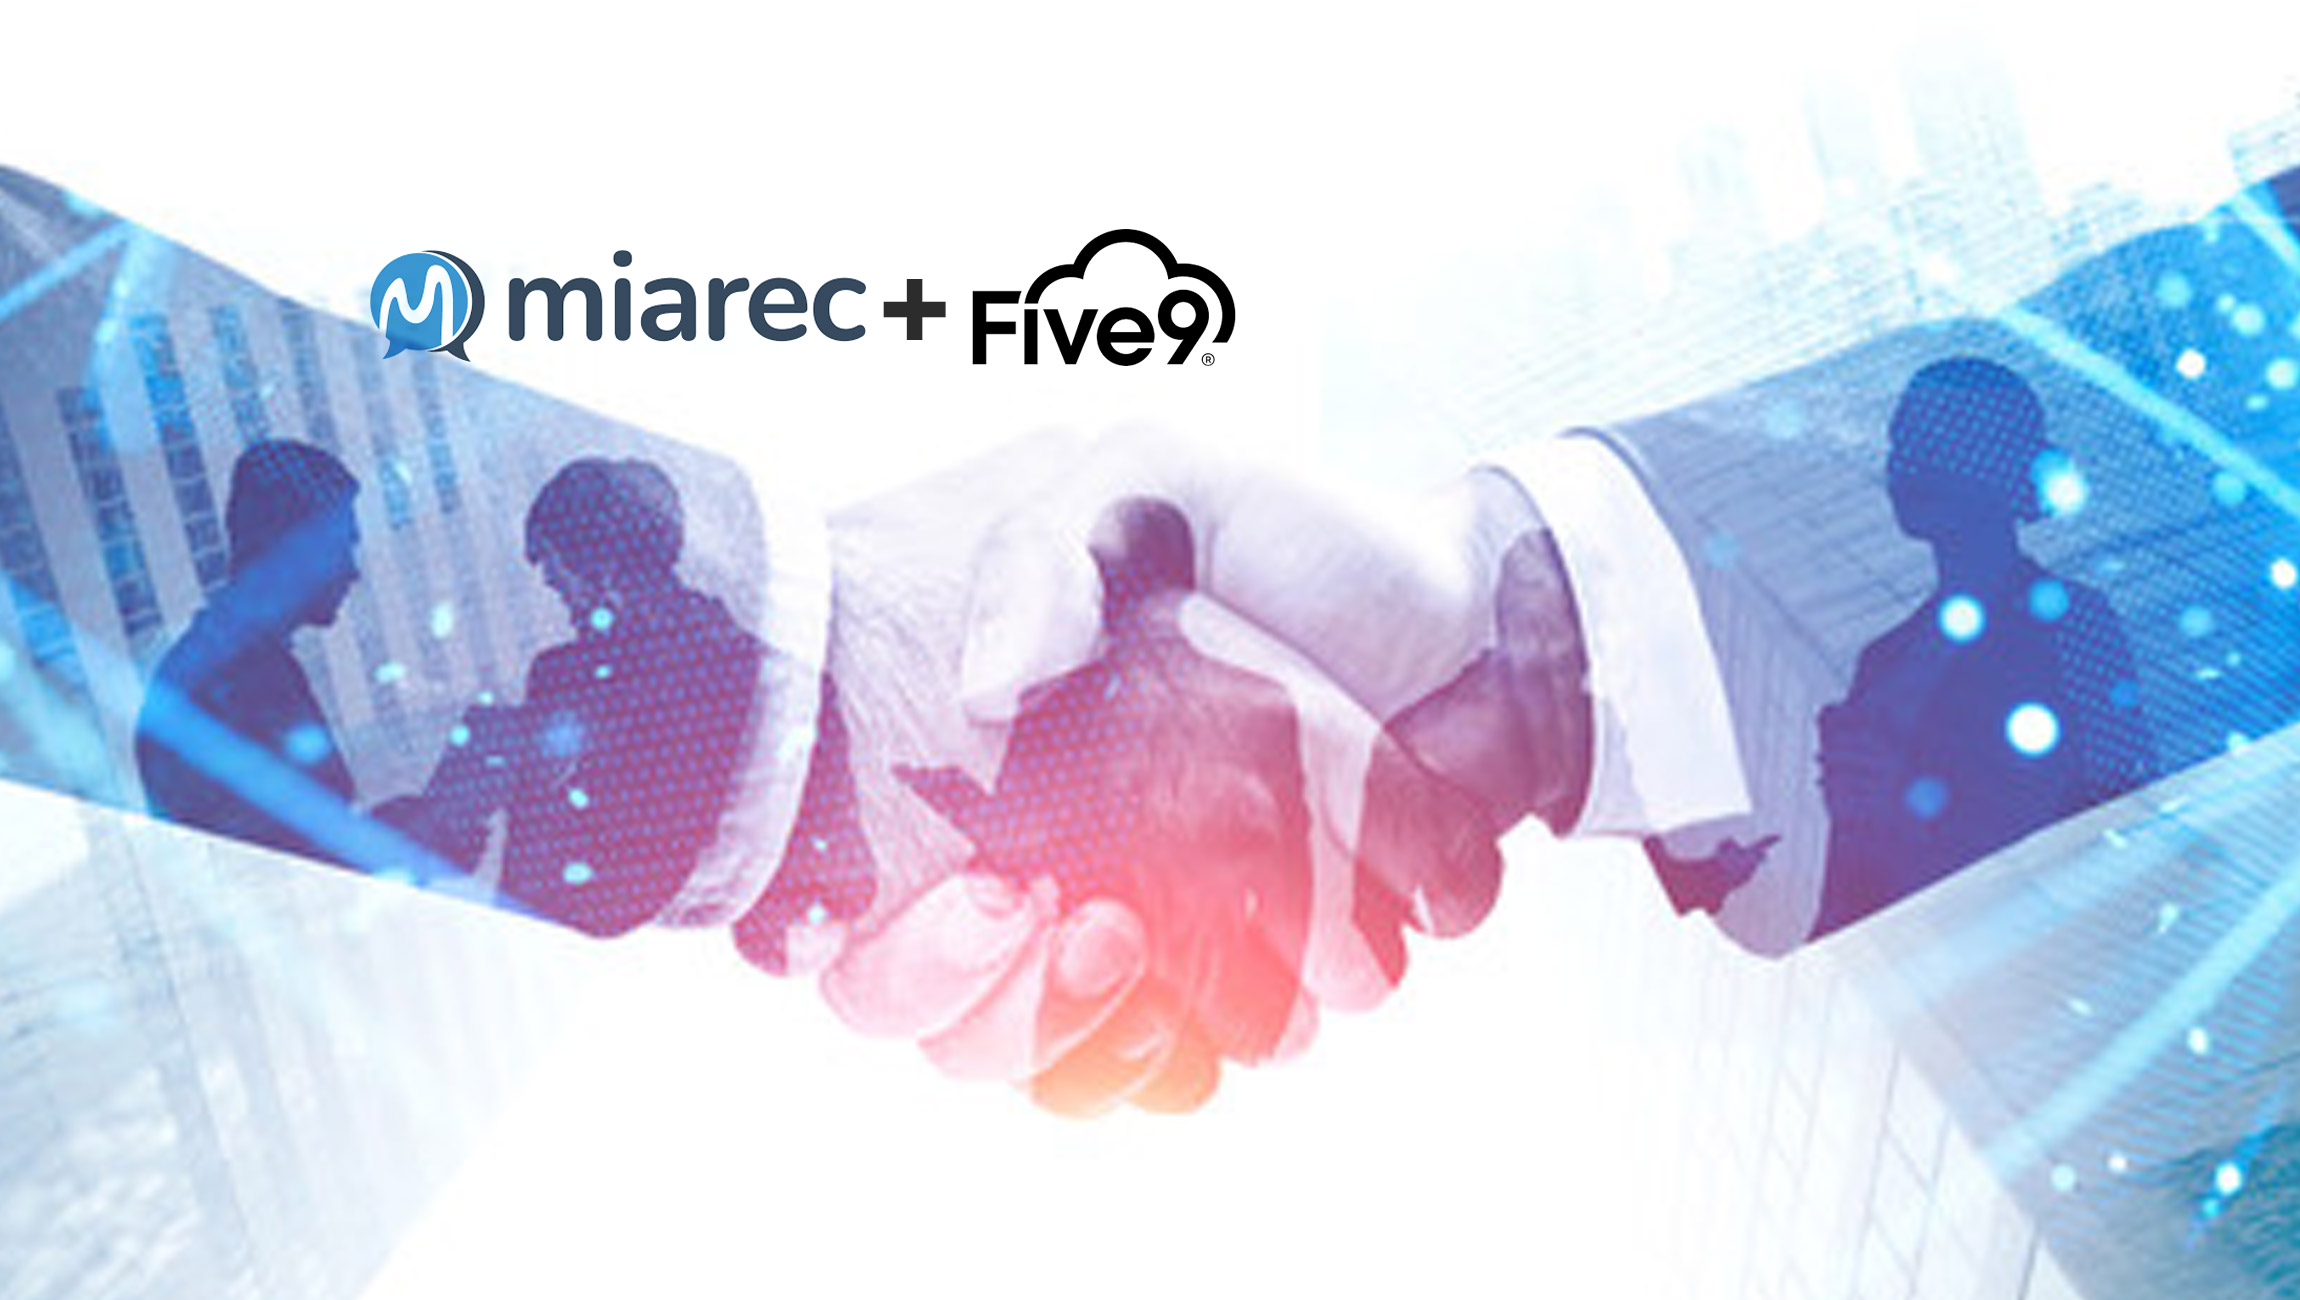 MiaRec Announces Partnership With Five9 to Deliver Innovative Voice Analytics and Quality Management Tools